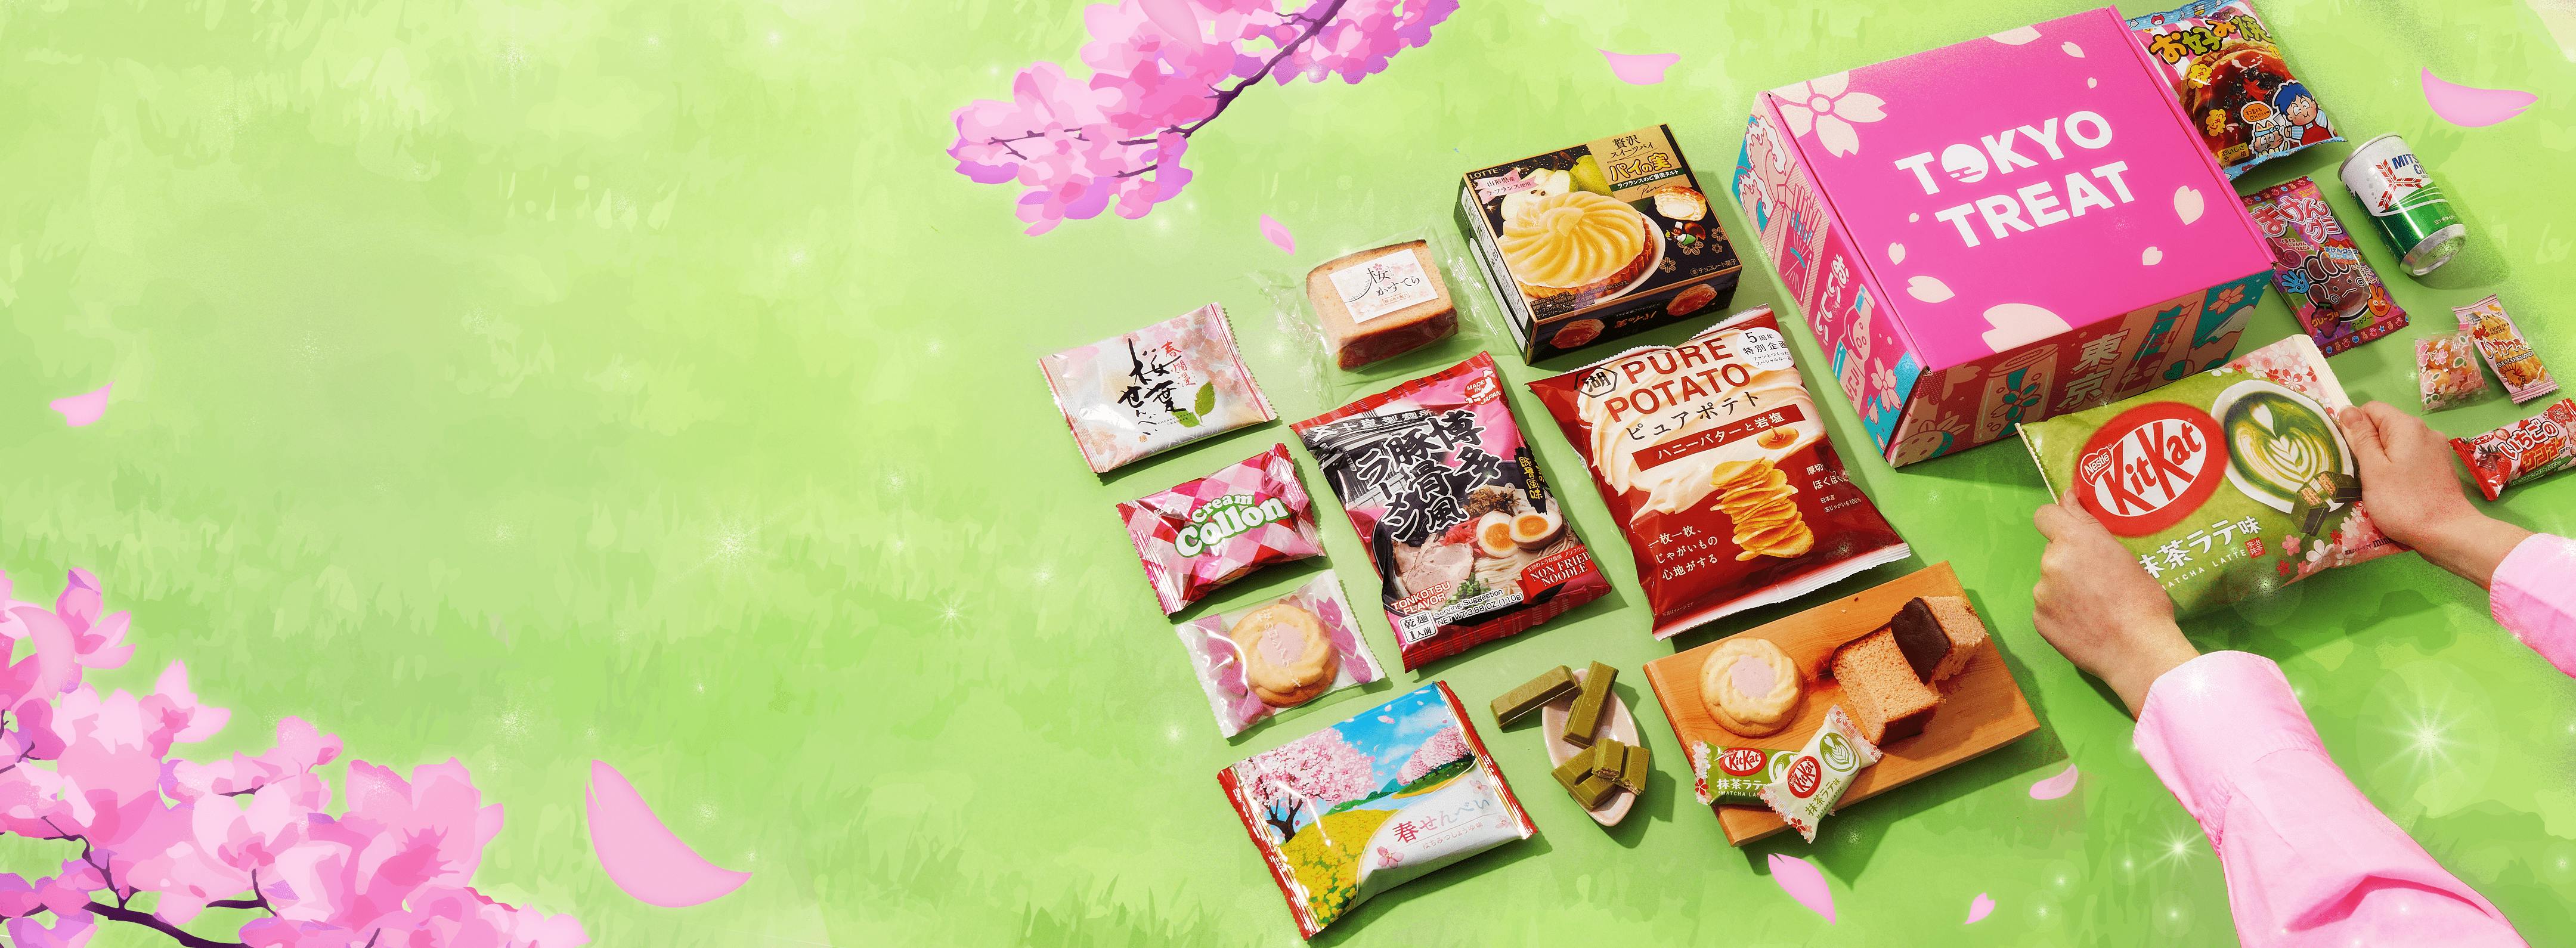 The TokyoTreat special-edition Sakura box sits against a cherry blossom backdrop surrounded by green grass and sakura snack items.